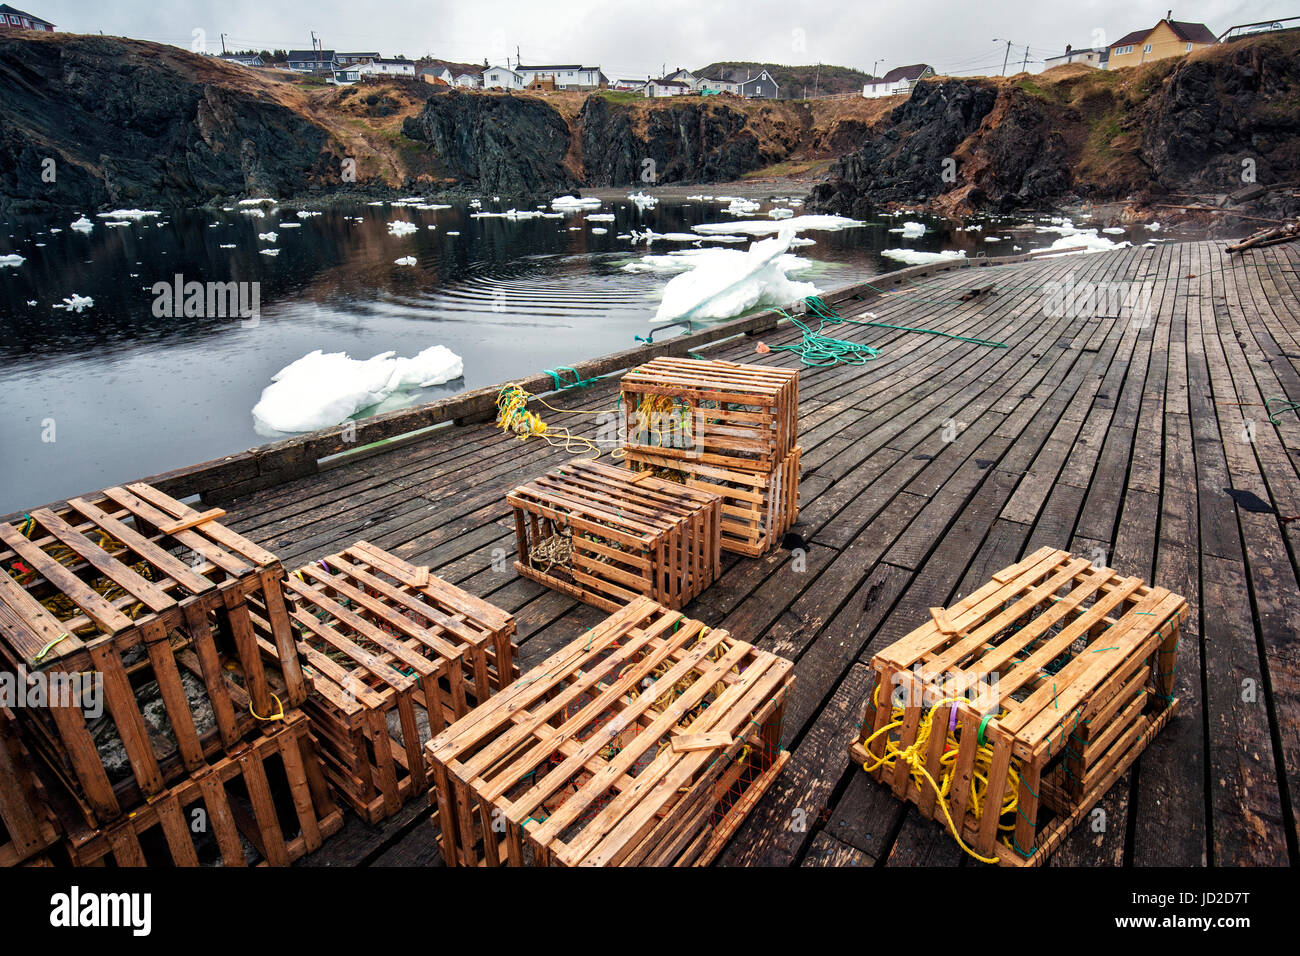 Wooden lobster traps on dock in Crow Head, Twillingate, Newfoundland, Canada Stock Photo